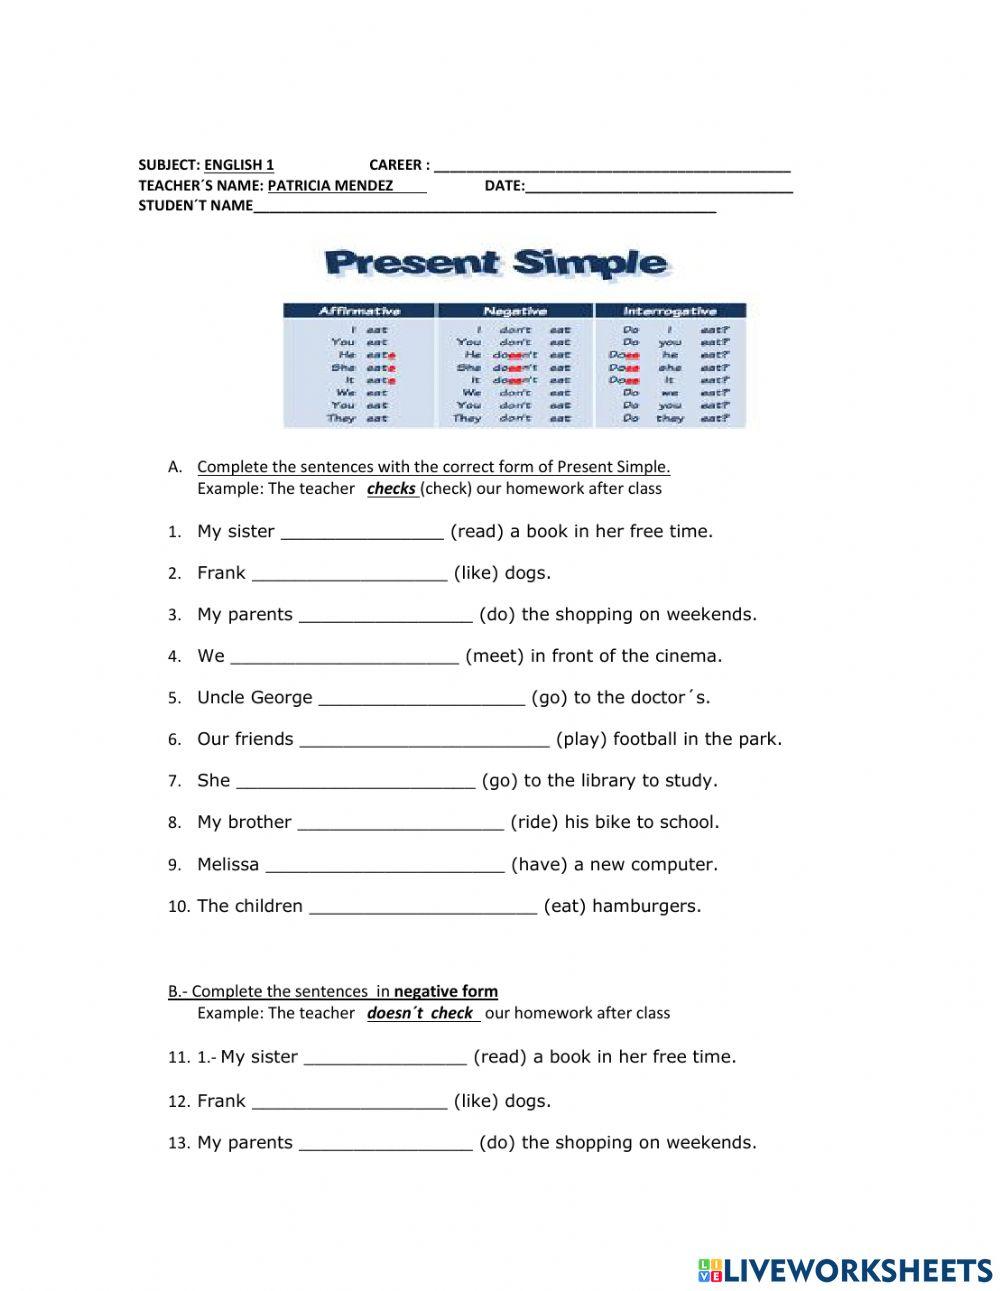 SIMPLE PRESENT online exercise for | Live Worksheets